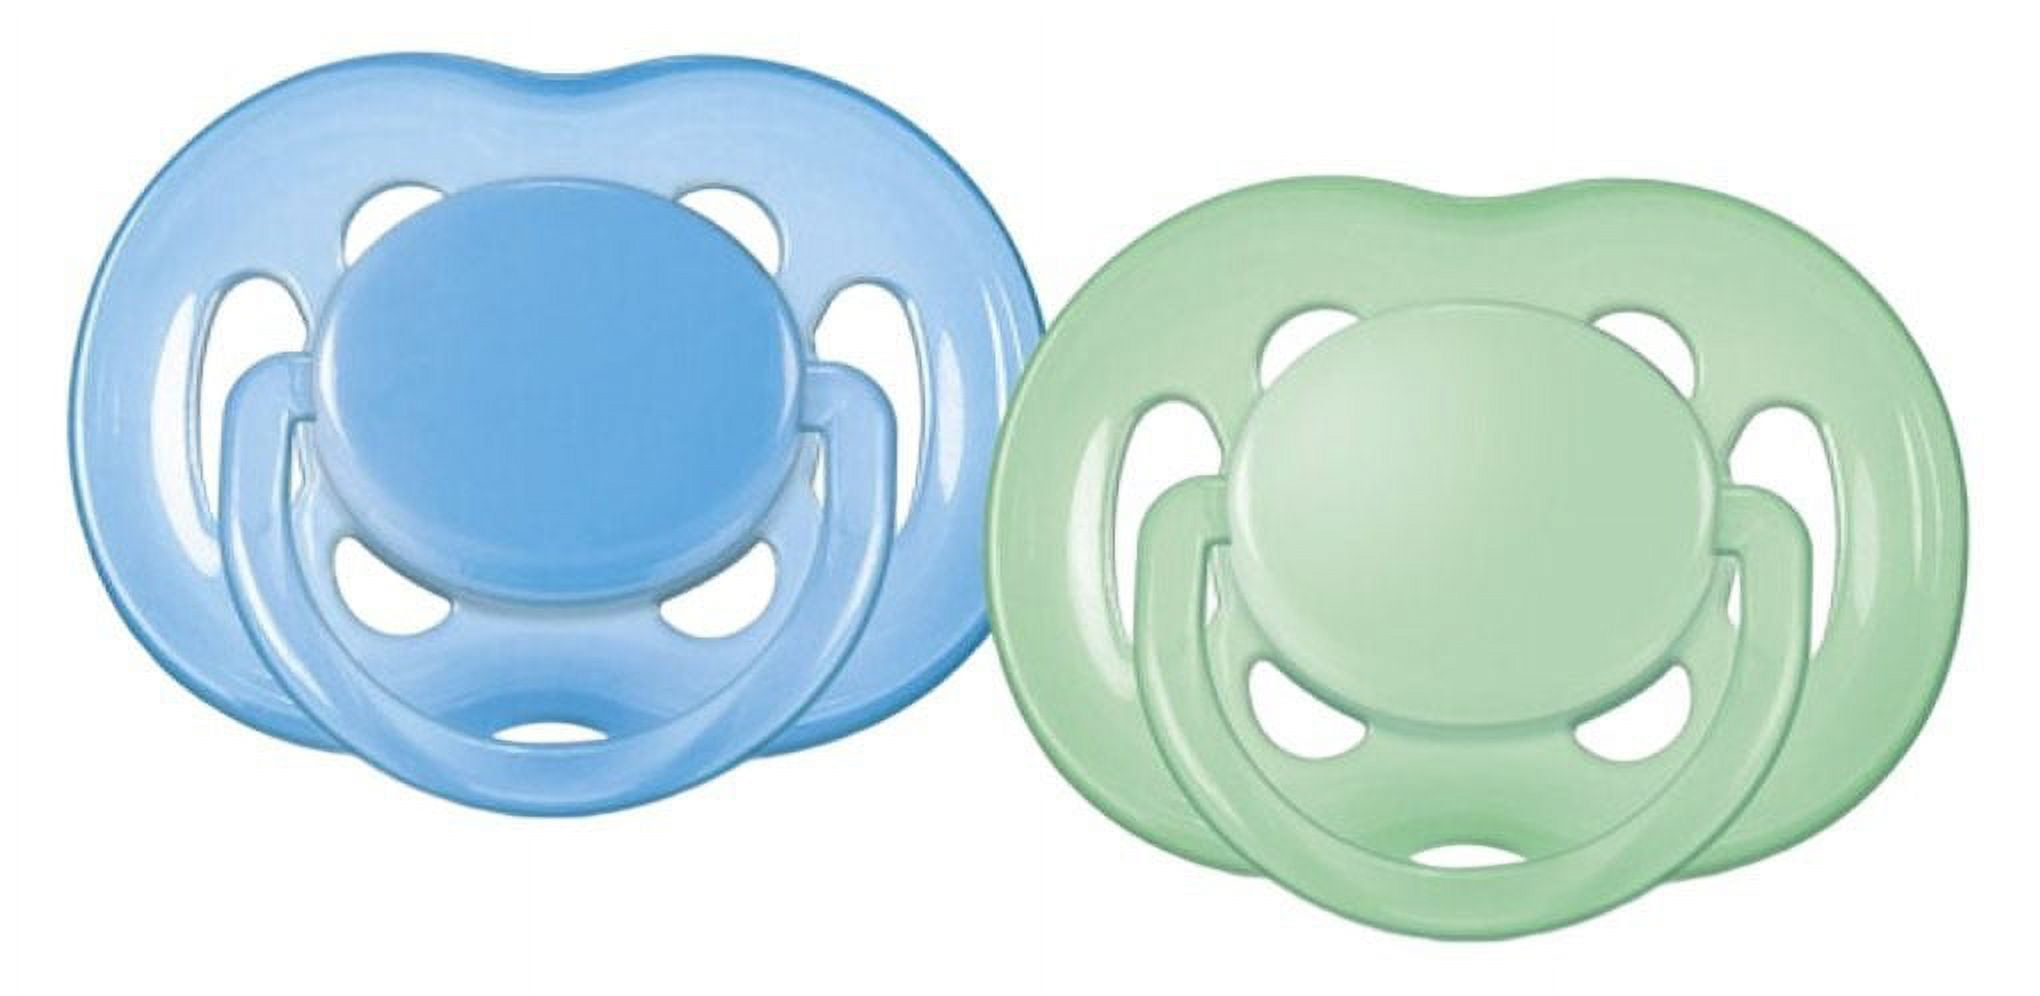 Philips AVENT Free Flow Orthodontic Pacifiers, 6-18 Months - 2 Counts 